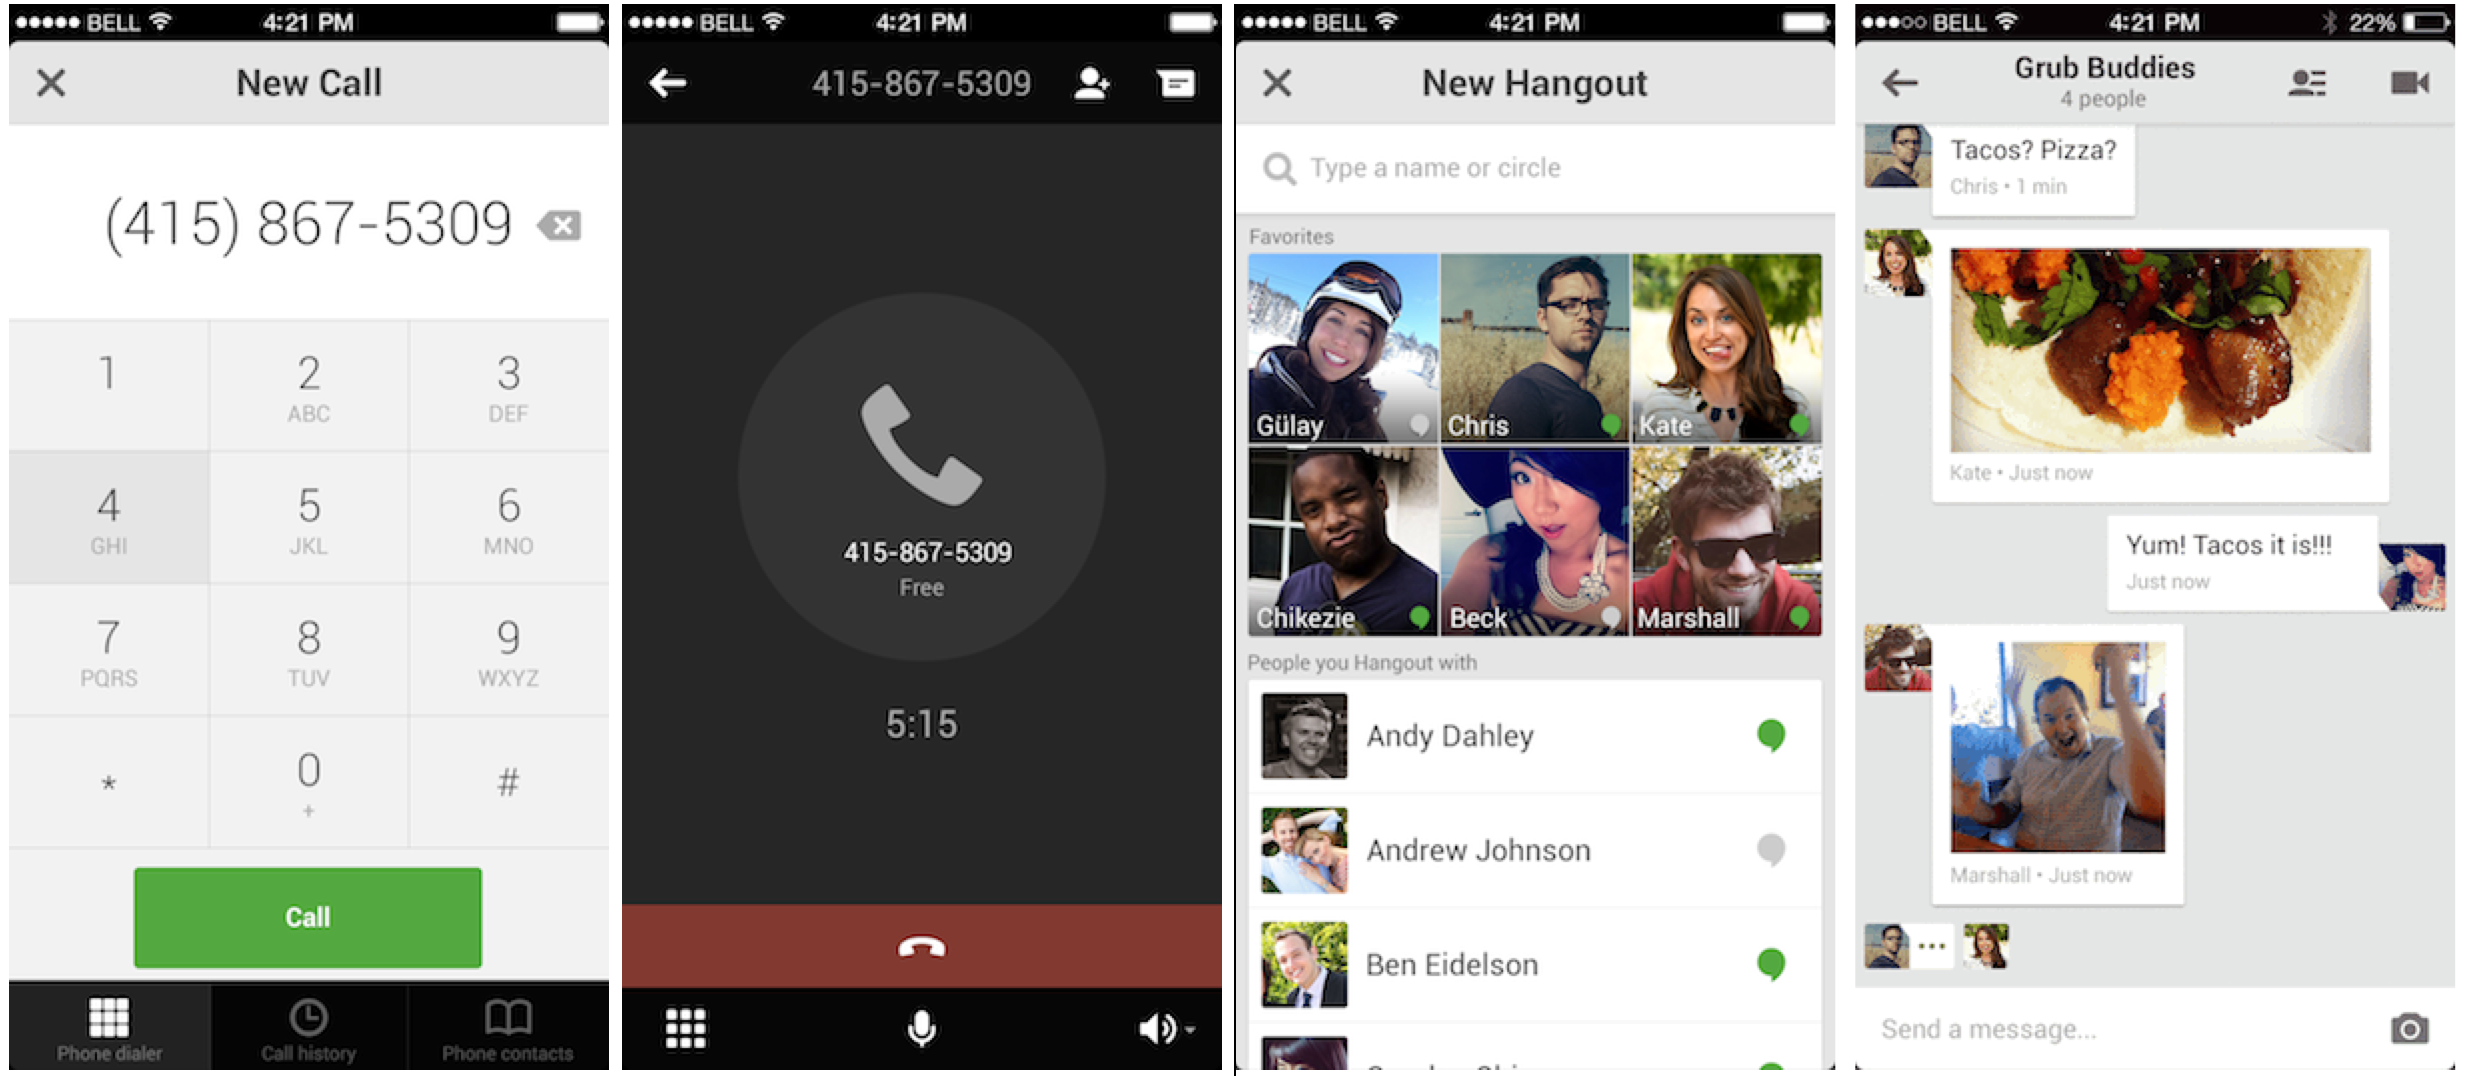 google hangouts for ios updated with free voice calls in the us image 1